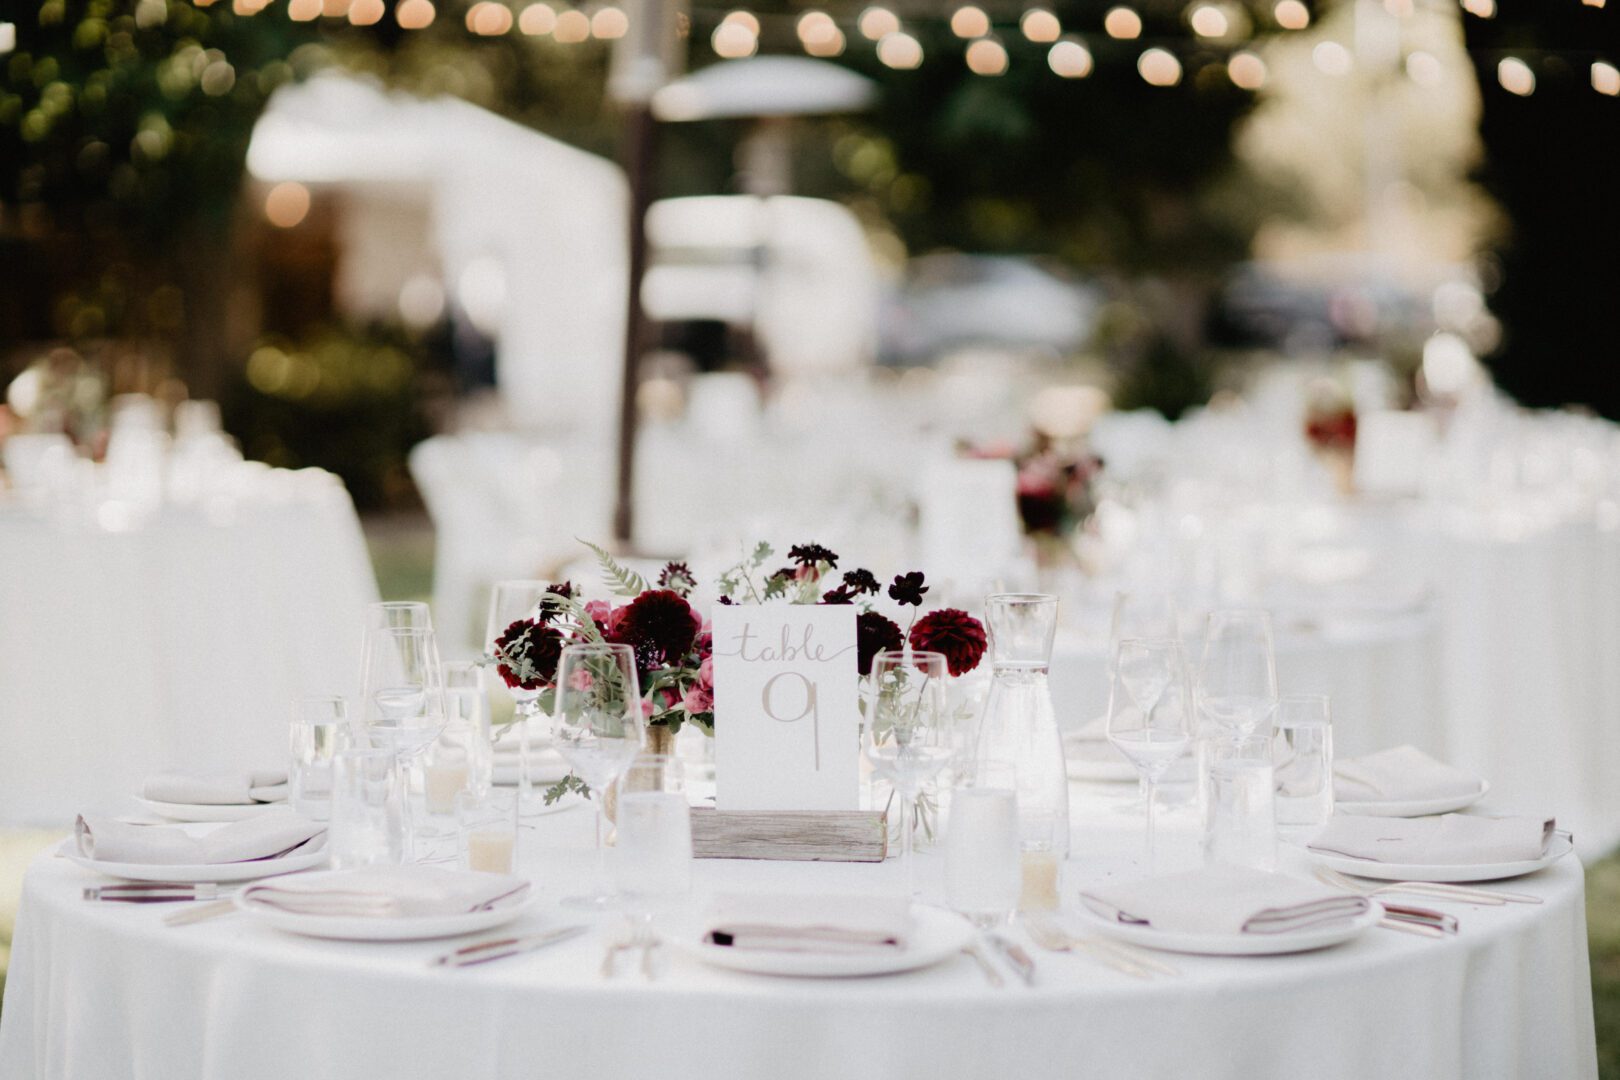 A white table setting with burgundy place settings.